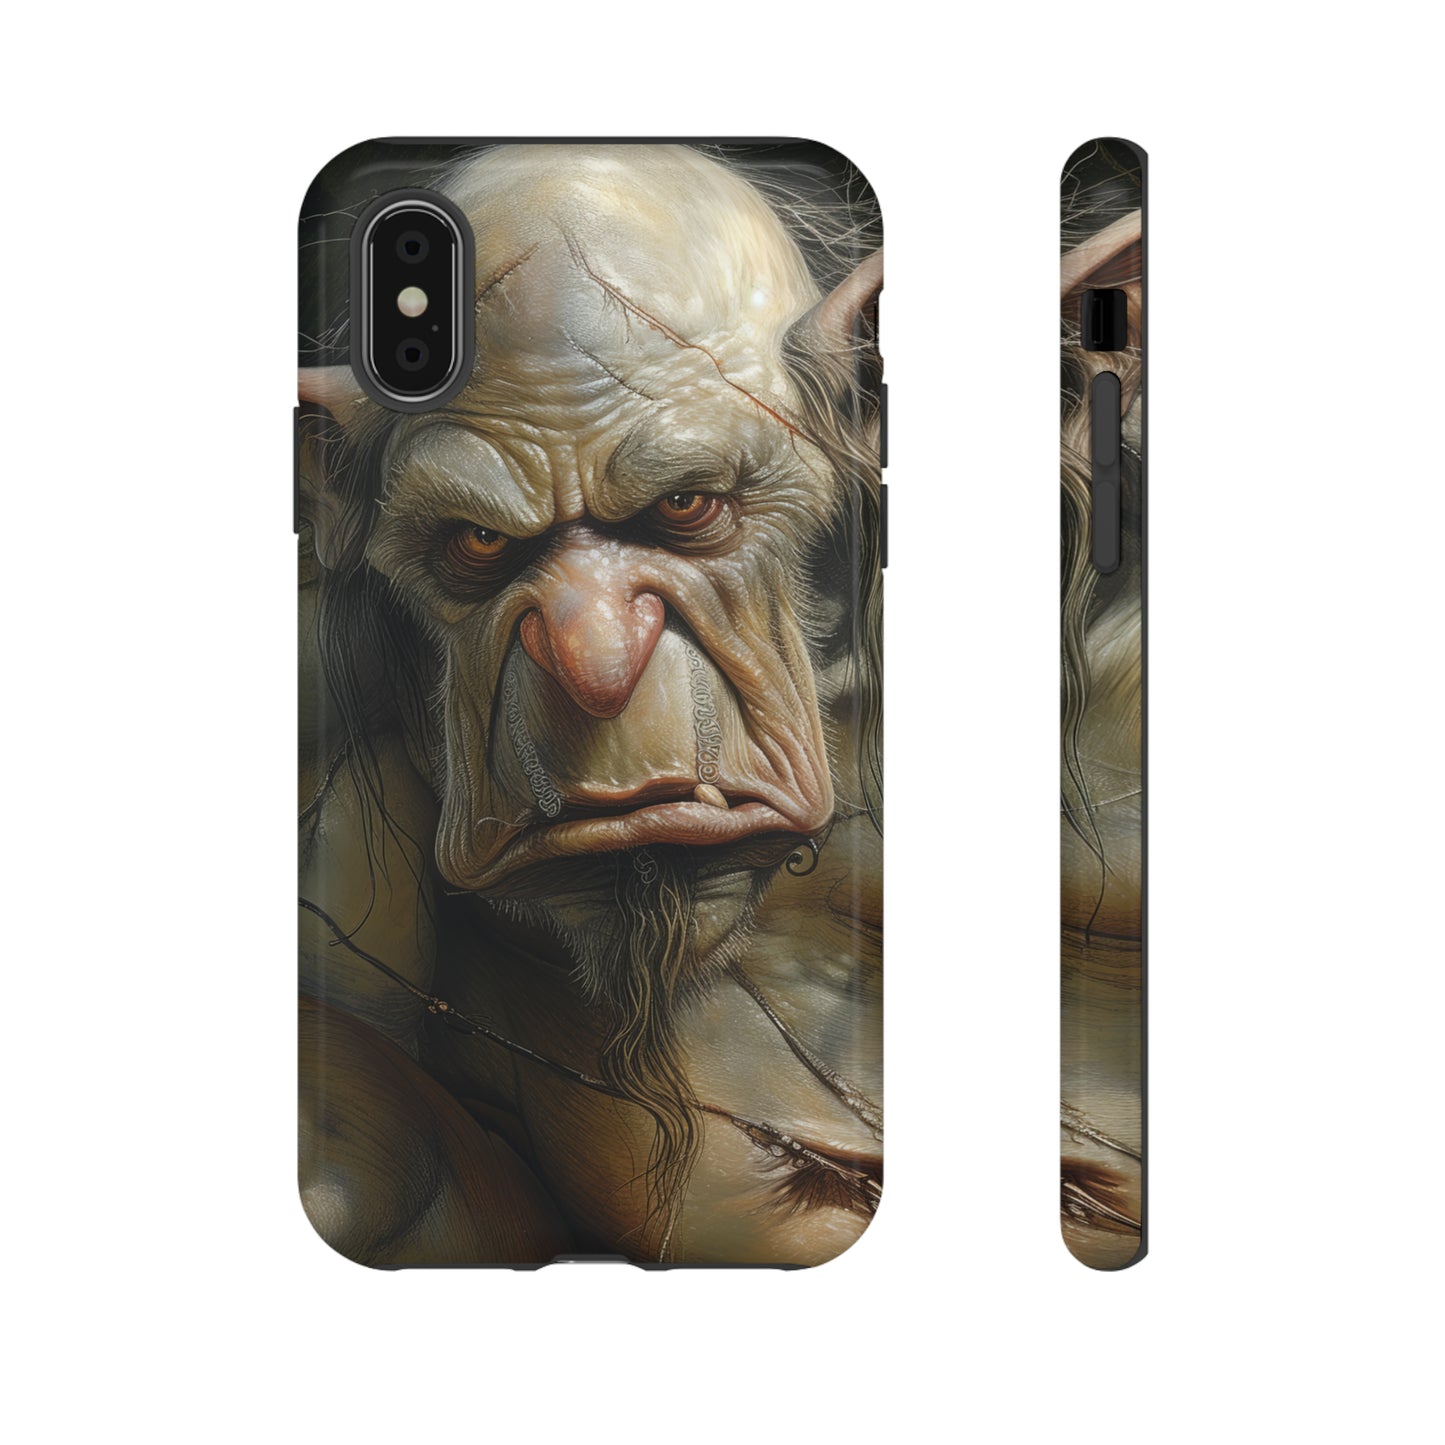 Tough Mobile Phone Cases: Nasty Troll